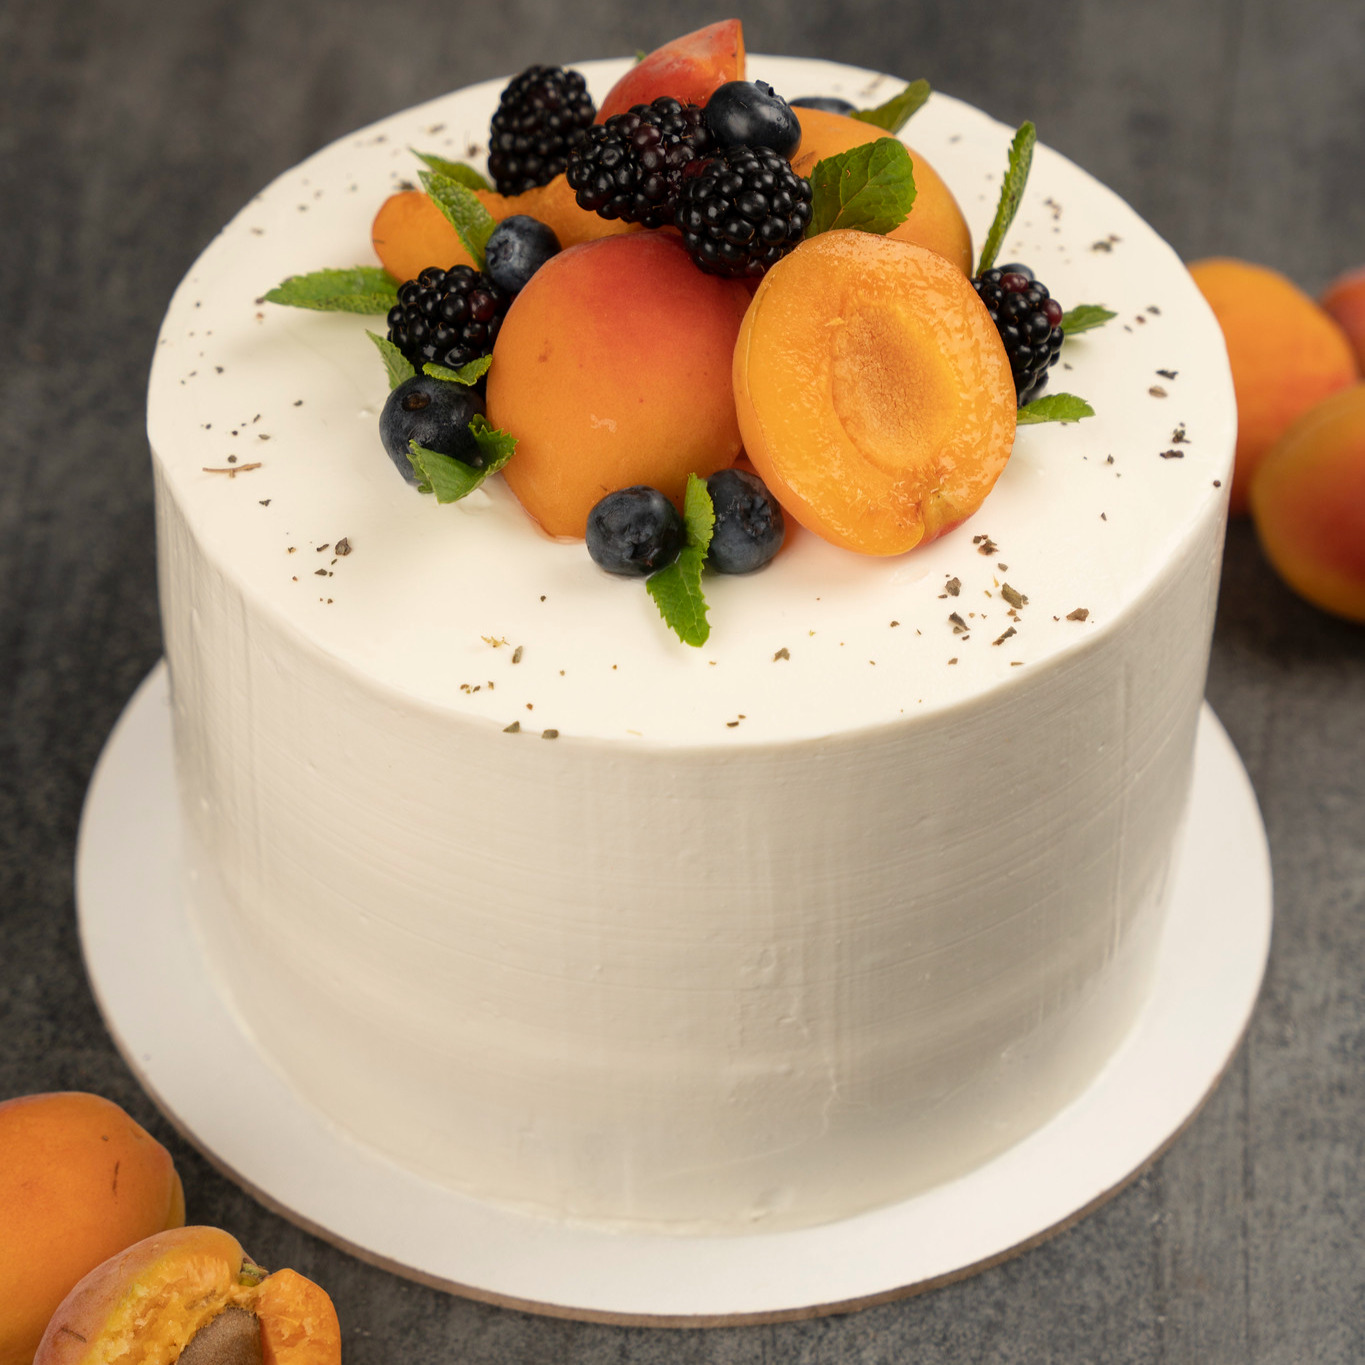  Apricot and Cottage Cheese cakecake